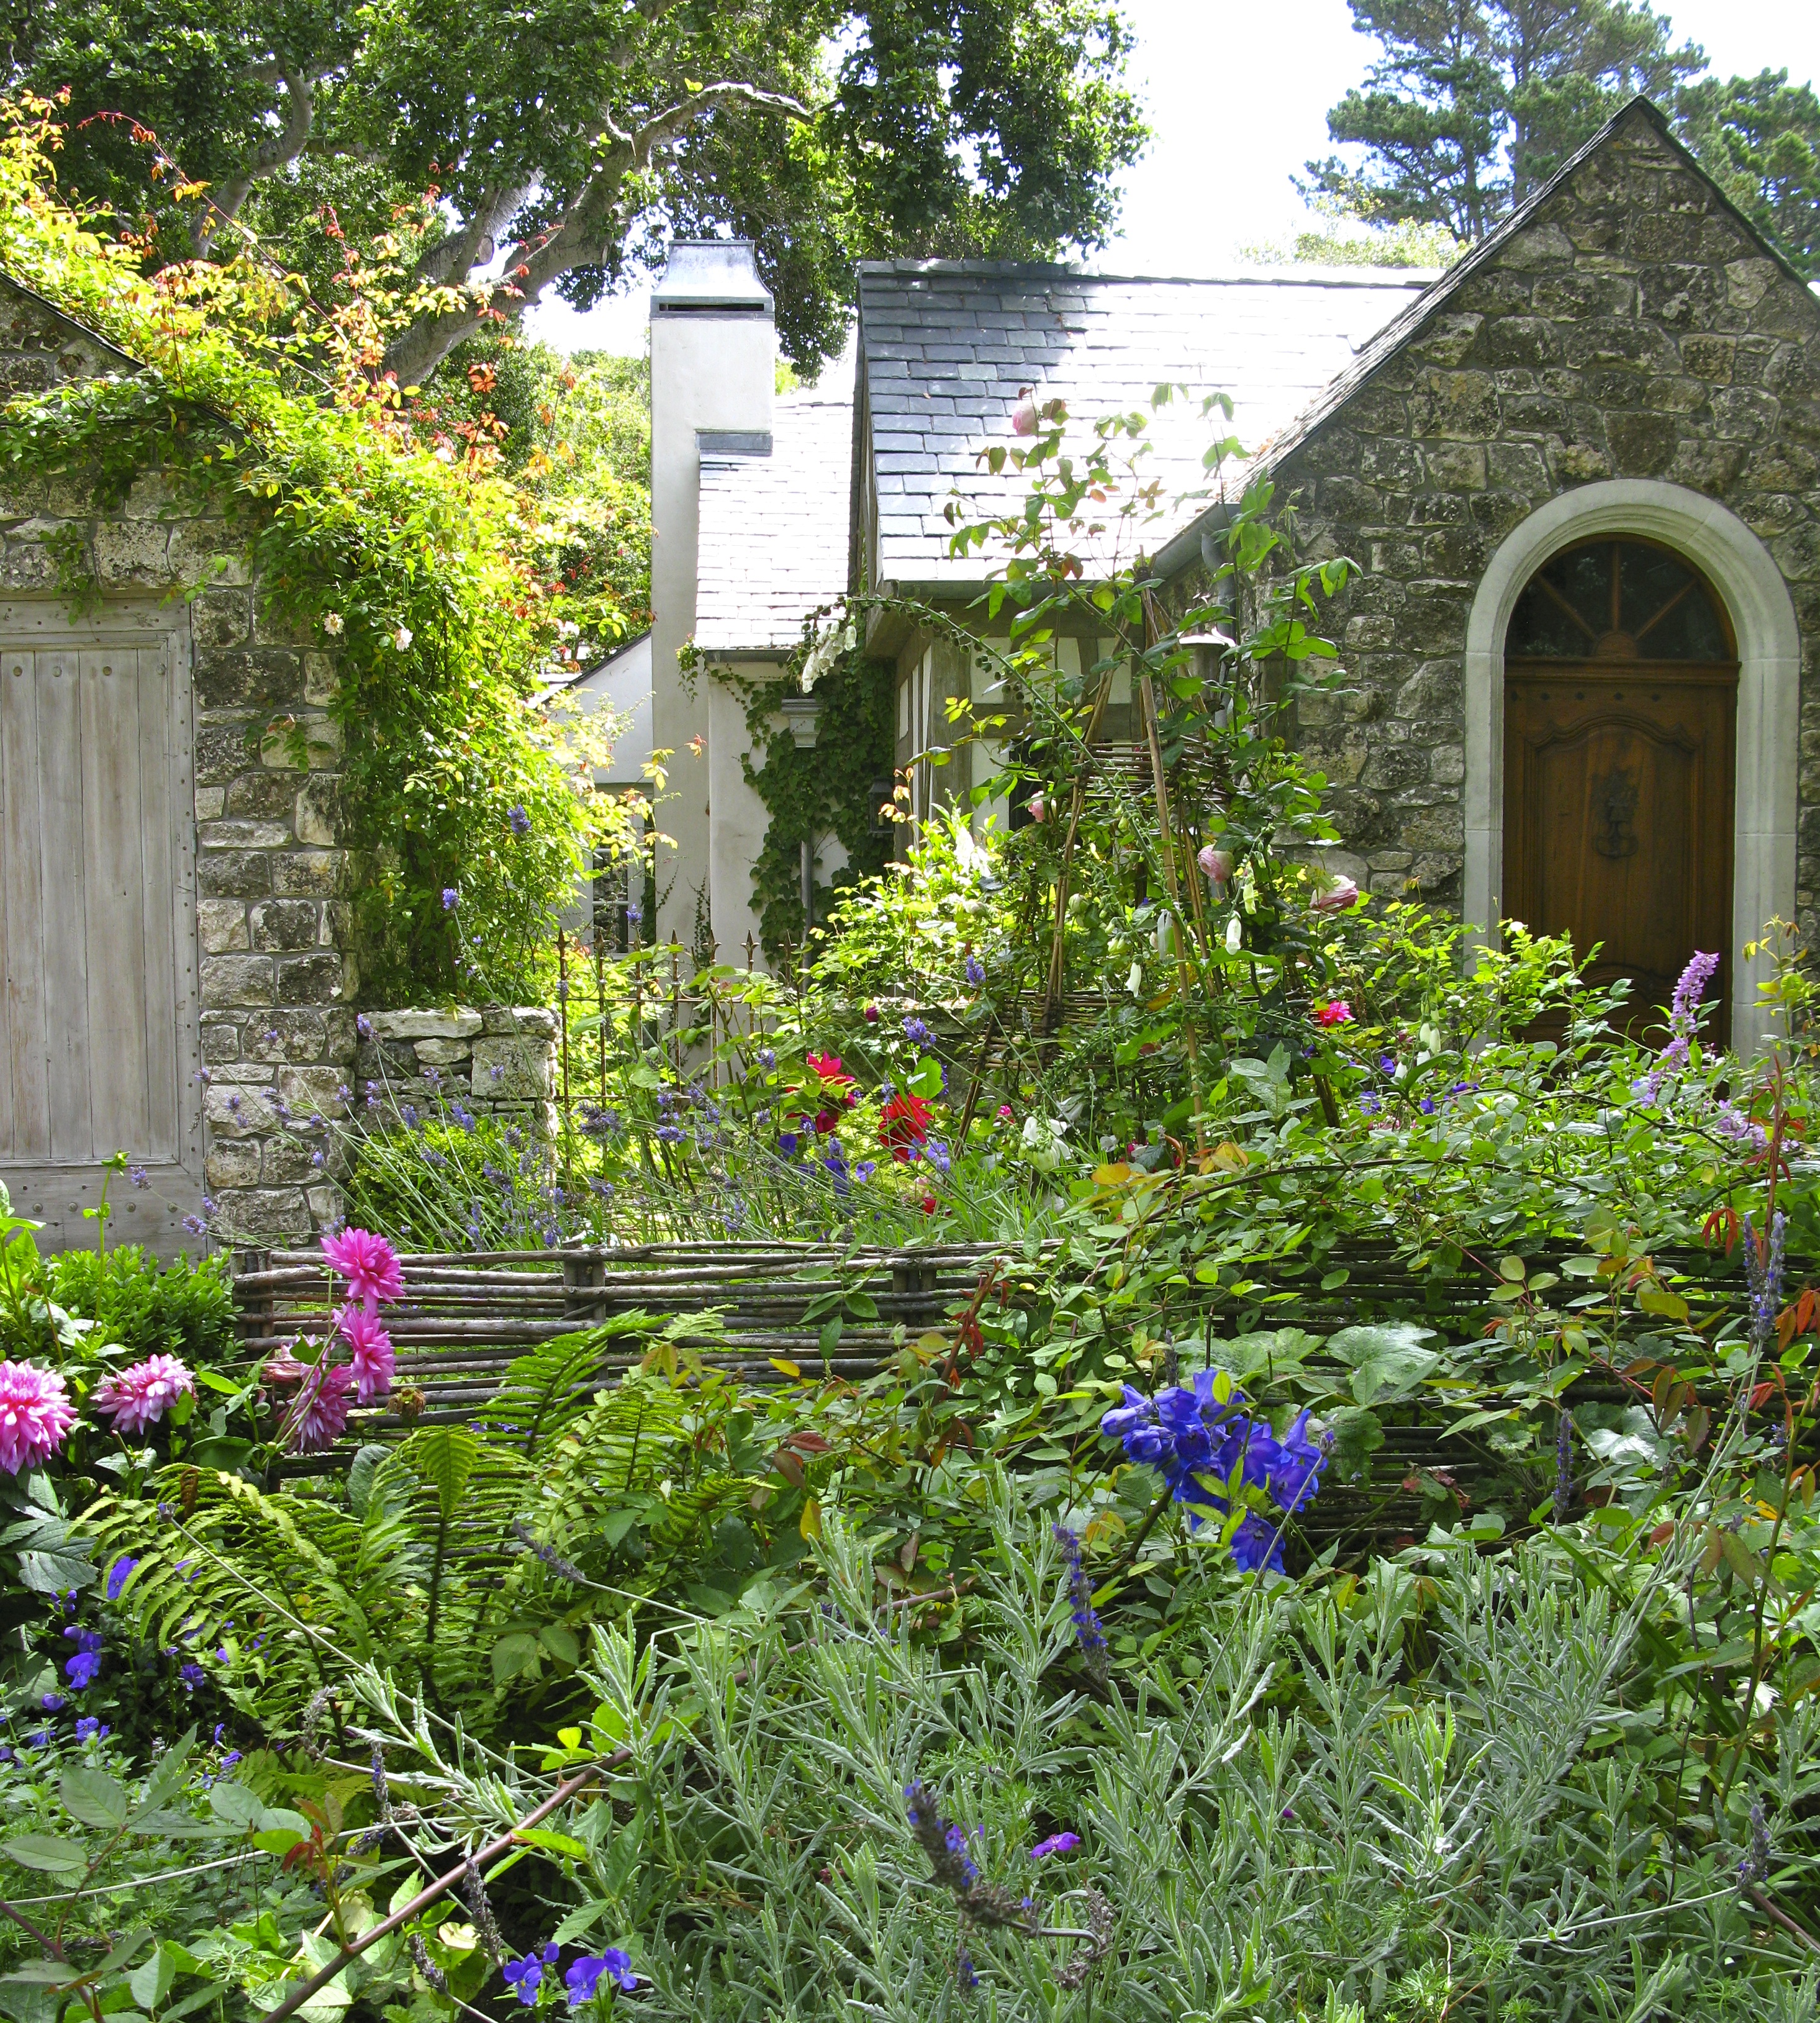 Carmel S Cottage Gardens Once Upon A Time Tales From Carmel By